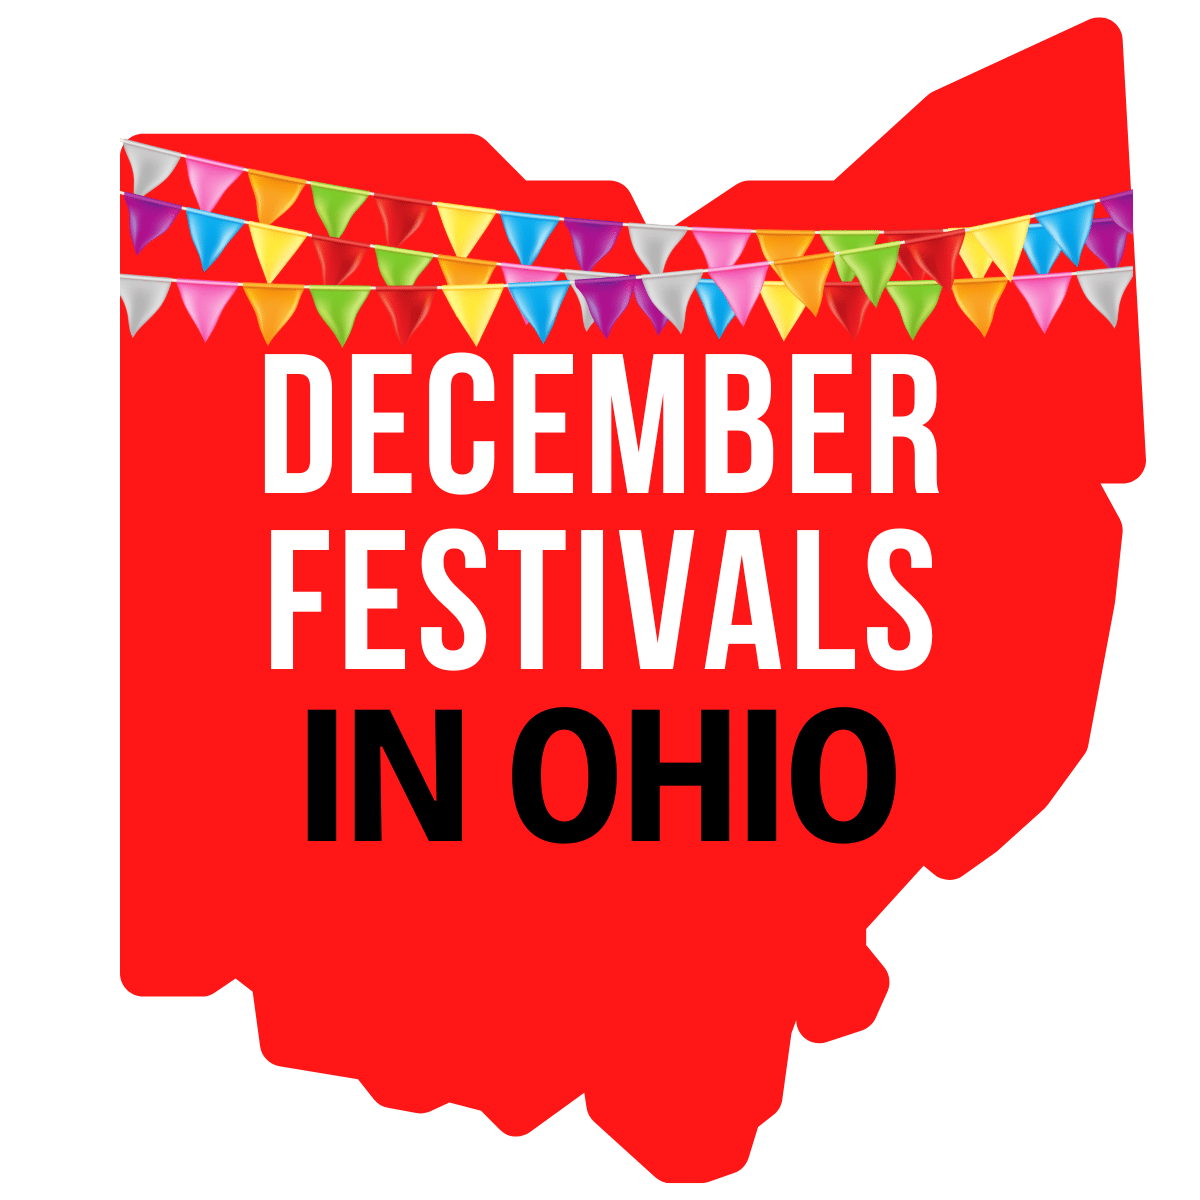 A square image of a red print of Ohio with colorful flags strung across it. It has text December Festivals in Ohio in white and black letters.